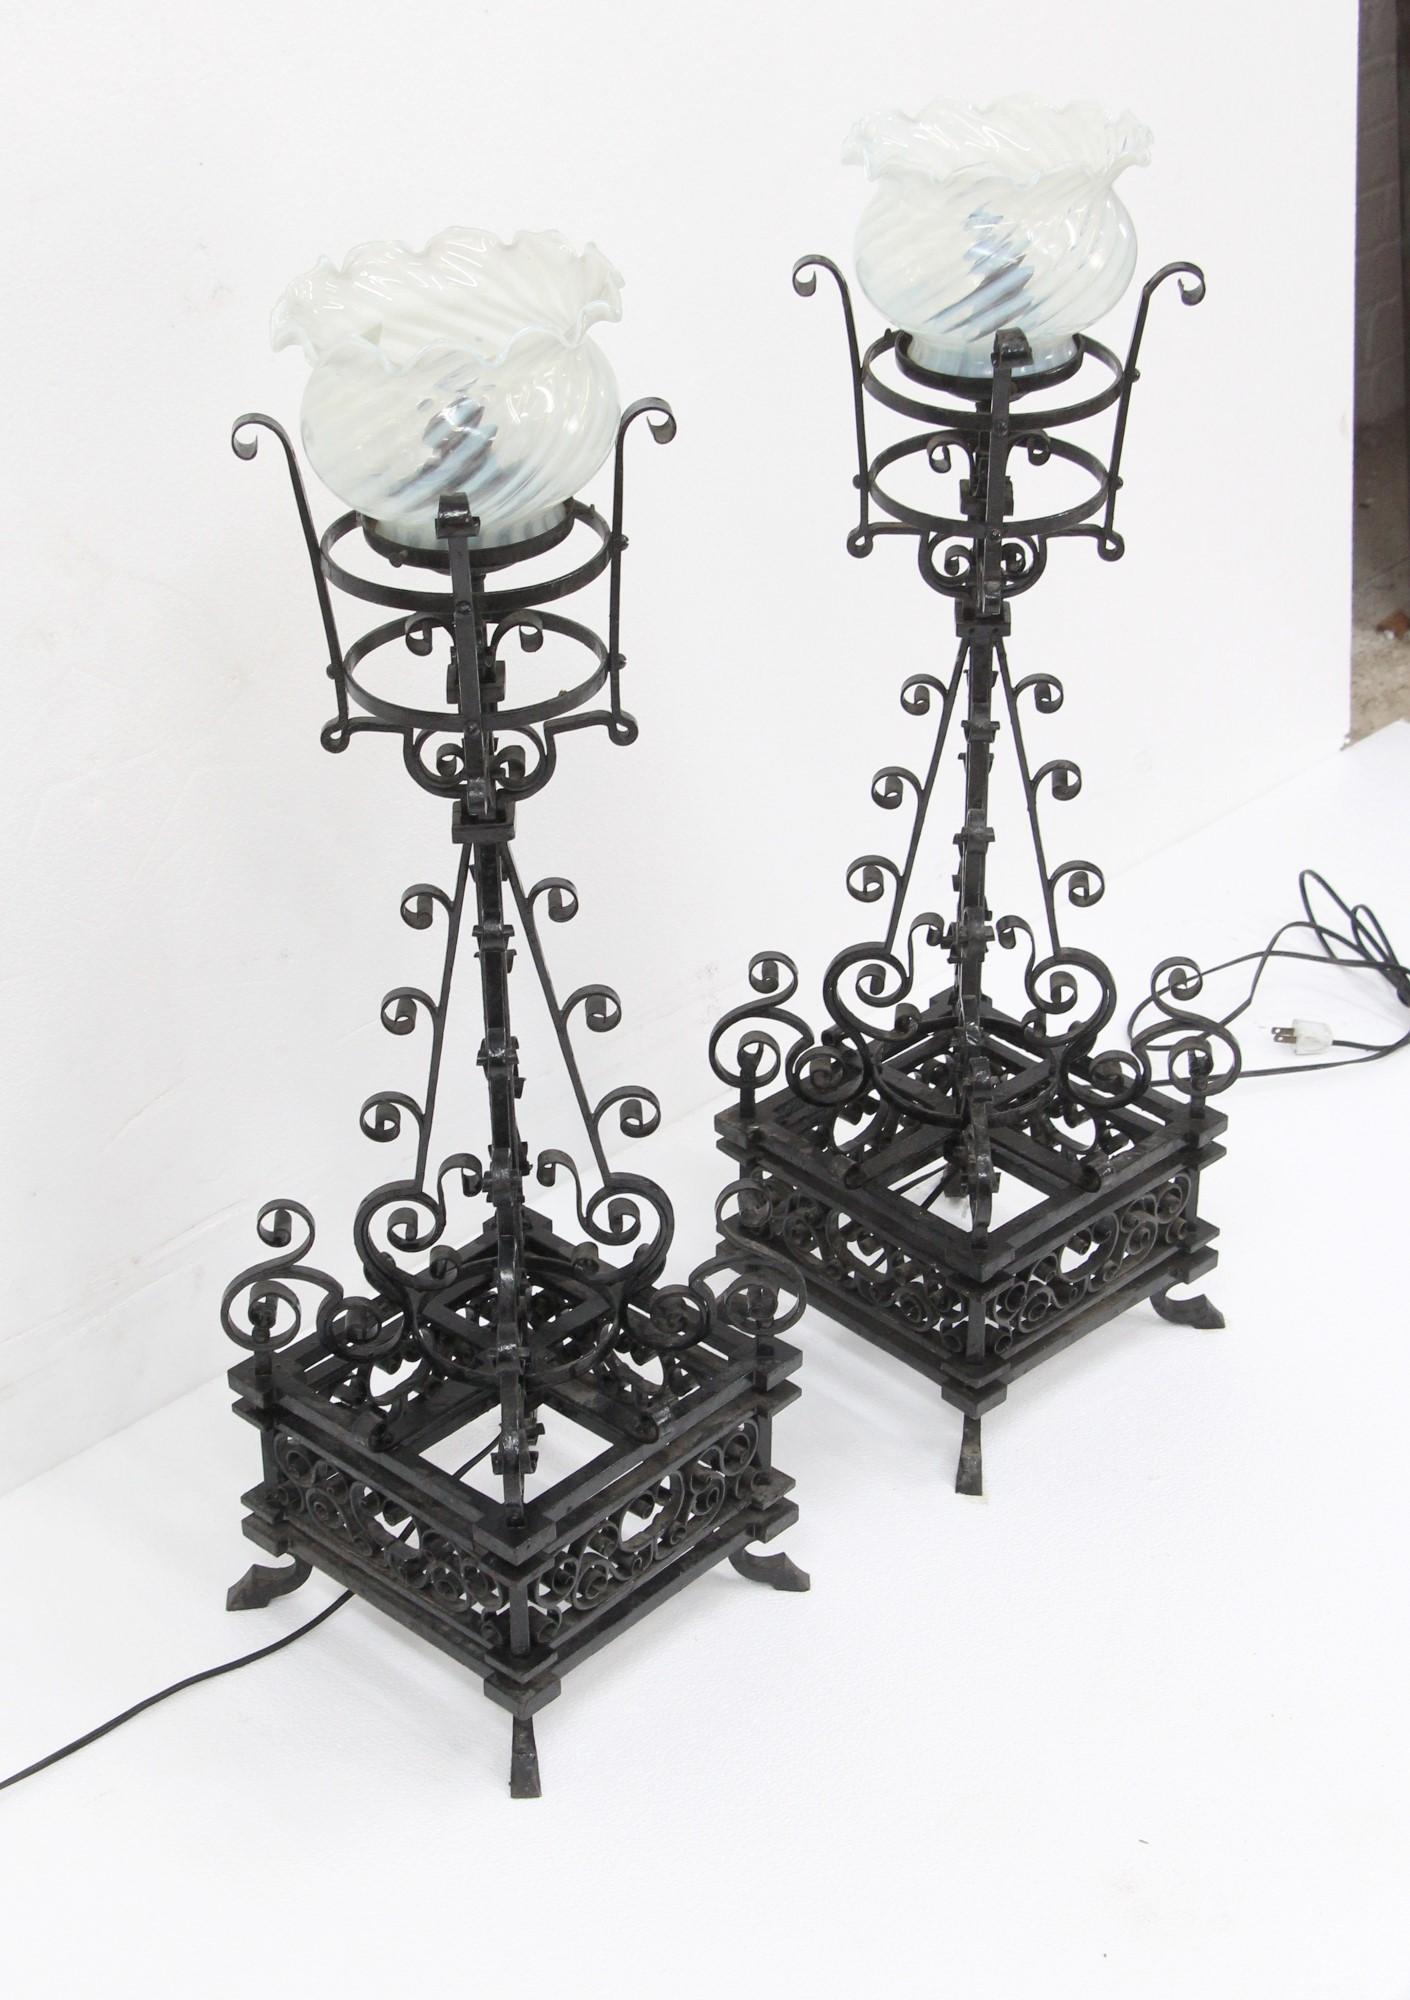 Late 1800s tall table lamps made from hand forged black wrought iron. Featuring fine intricate details on the wrought iron. The included hand blown shades were added later. Originally gas lights but now electrified. Cleaned and rewired. Priced as a